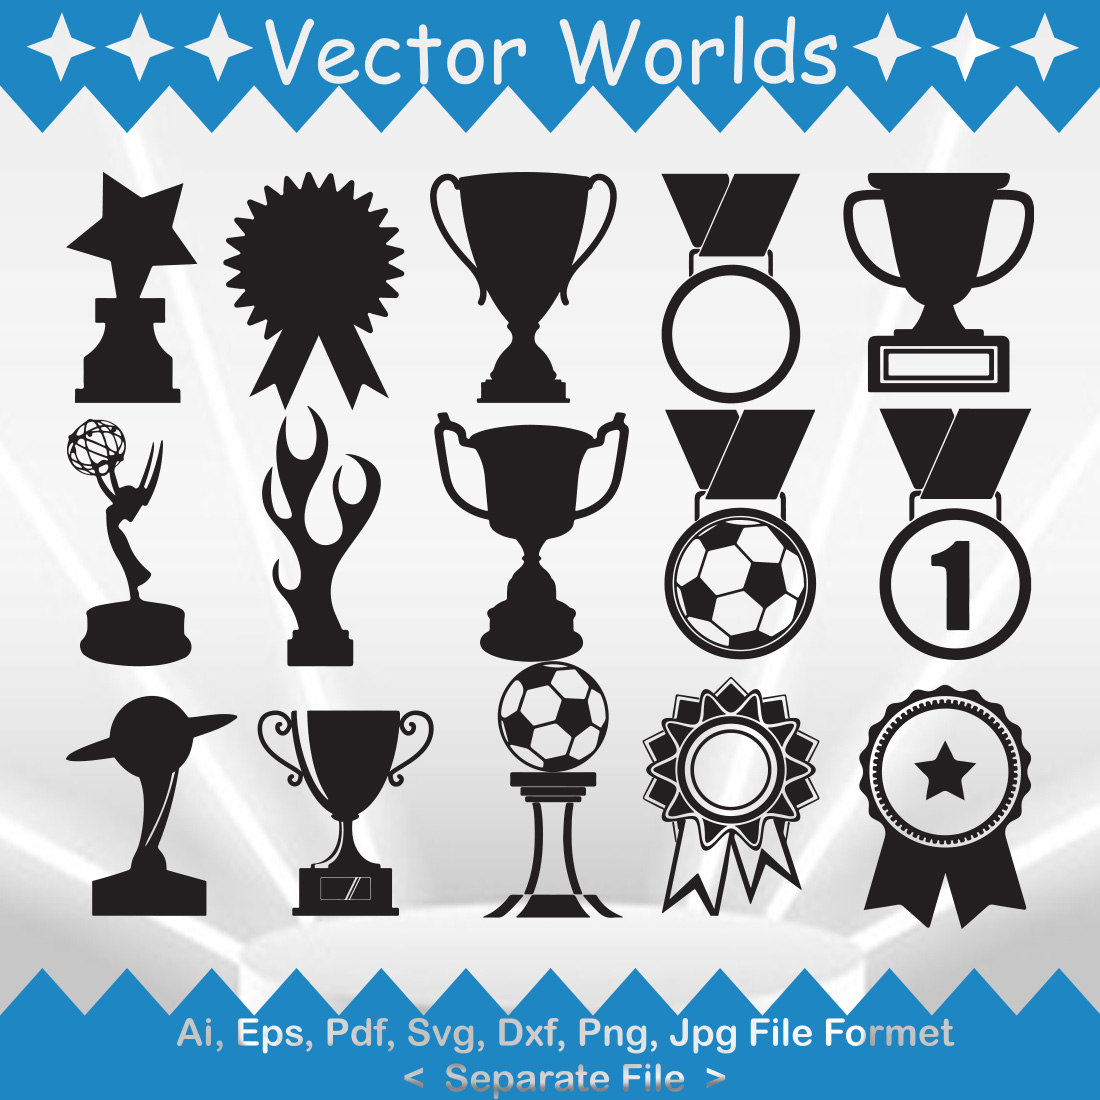 Fifa World Cup Royalty Free Stock SVG Vector and Clip Art